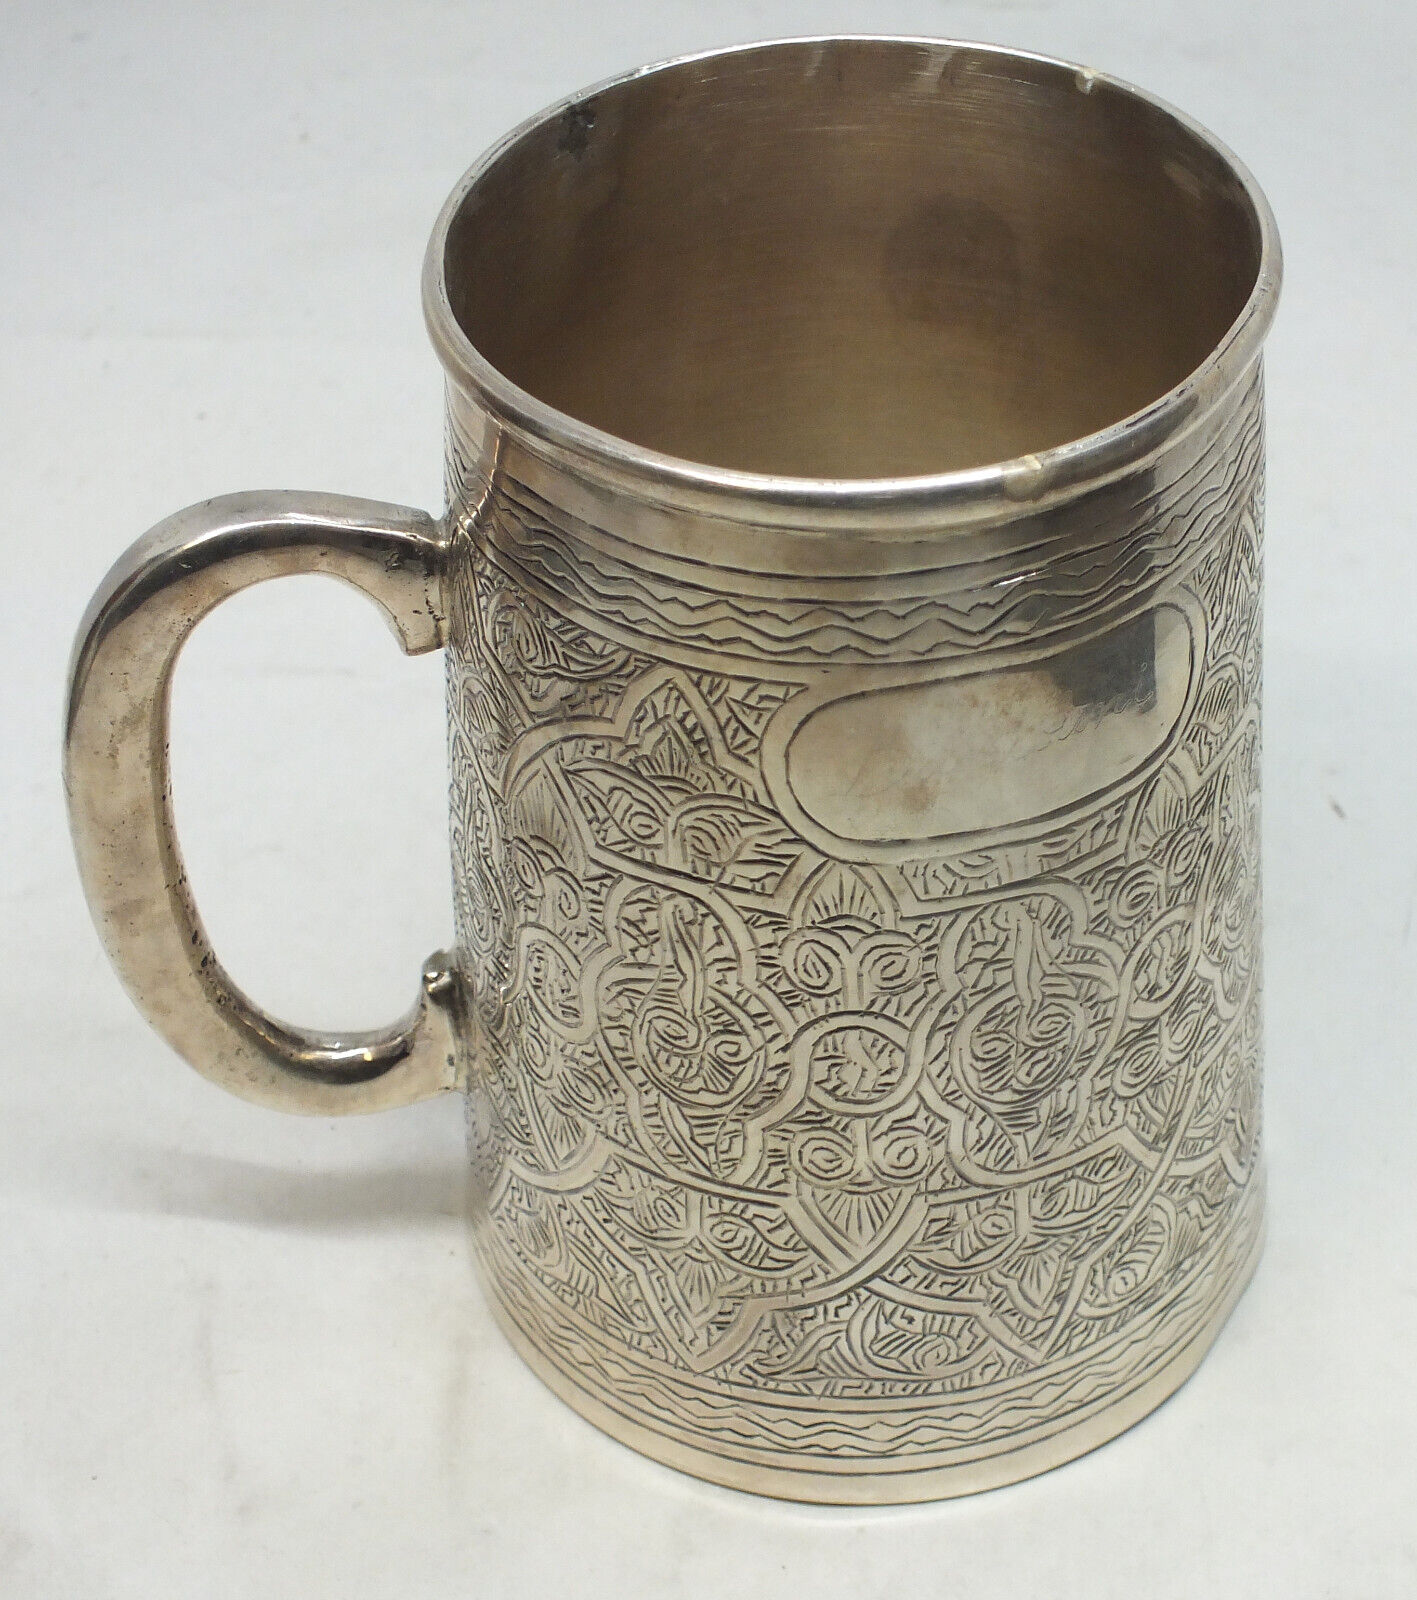 Egyptian Stein Mug Vintage .900 Silver Engraved Cup - C500